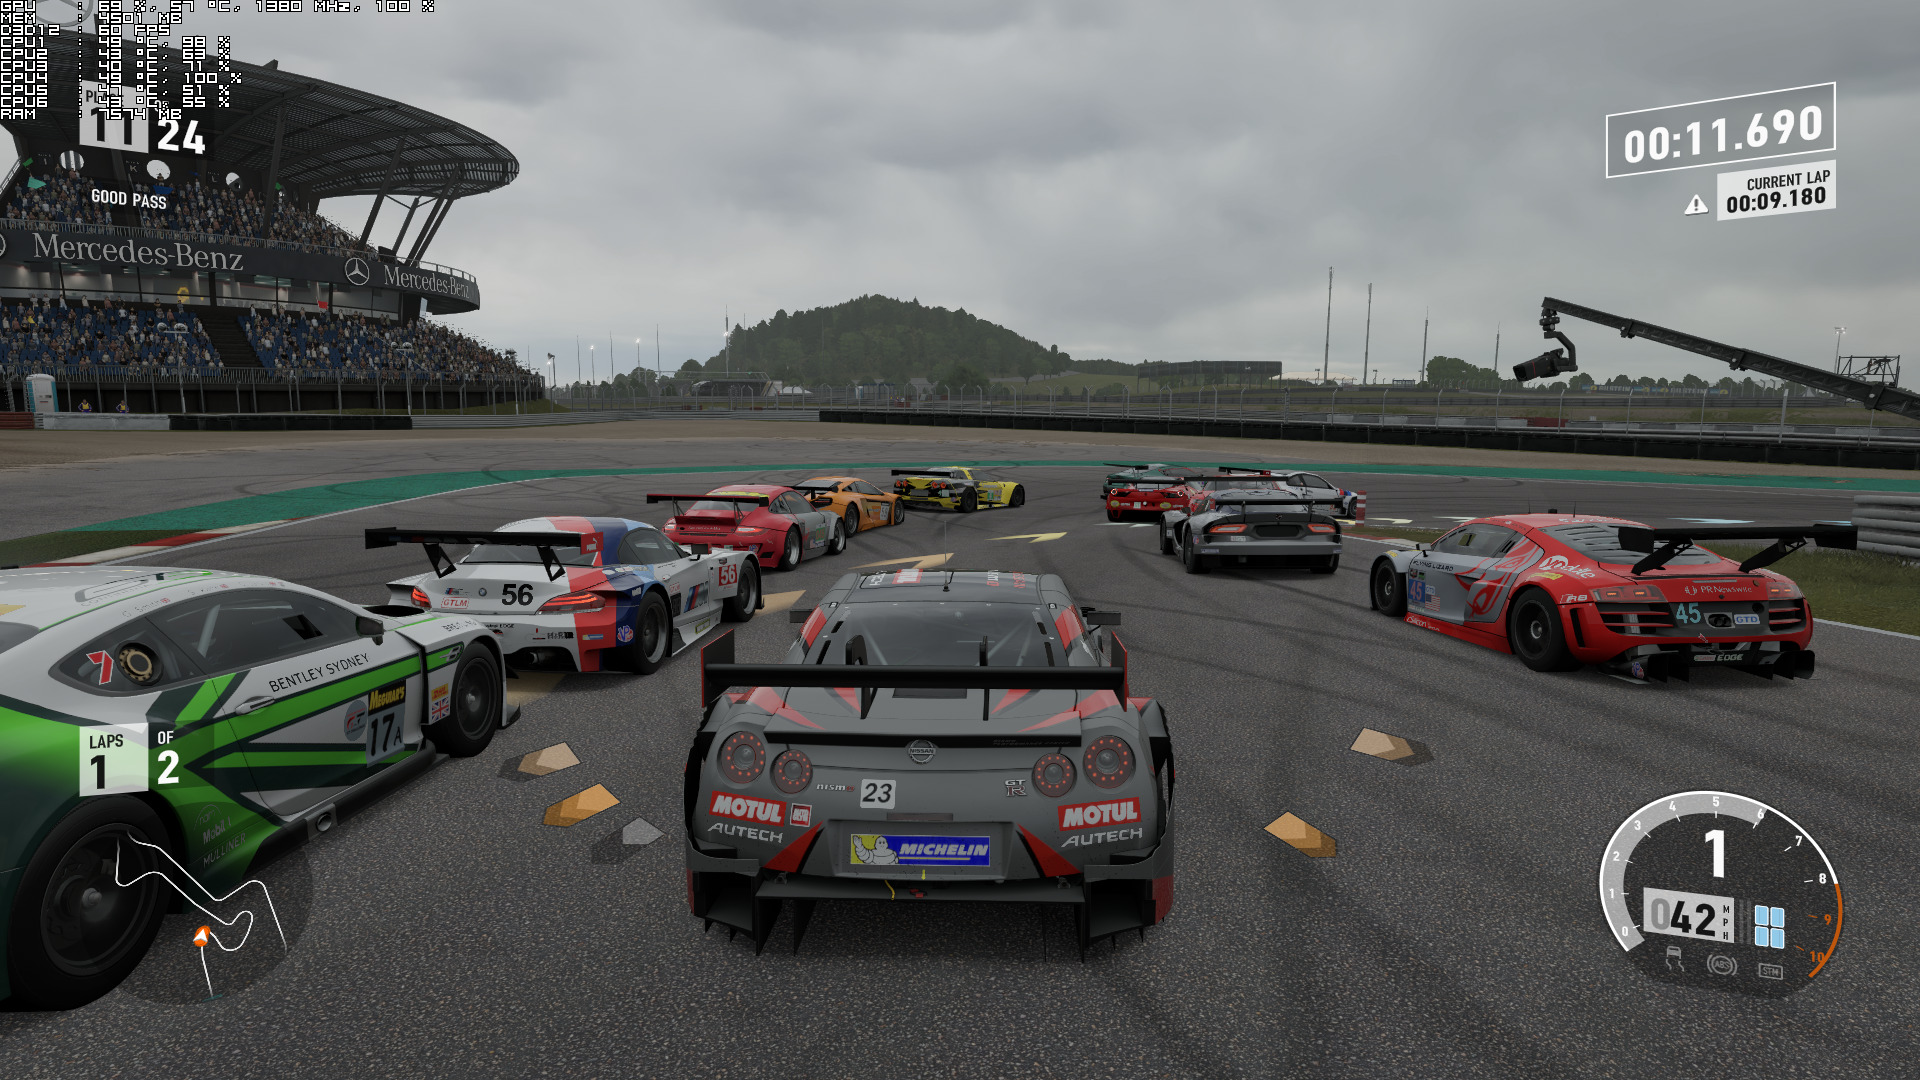 Forza Motorsport – Official Gameplay of the Initial Races 